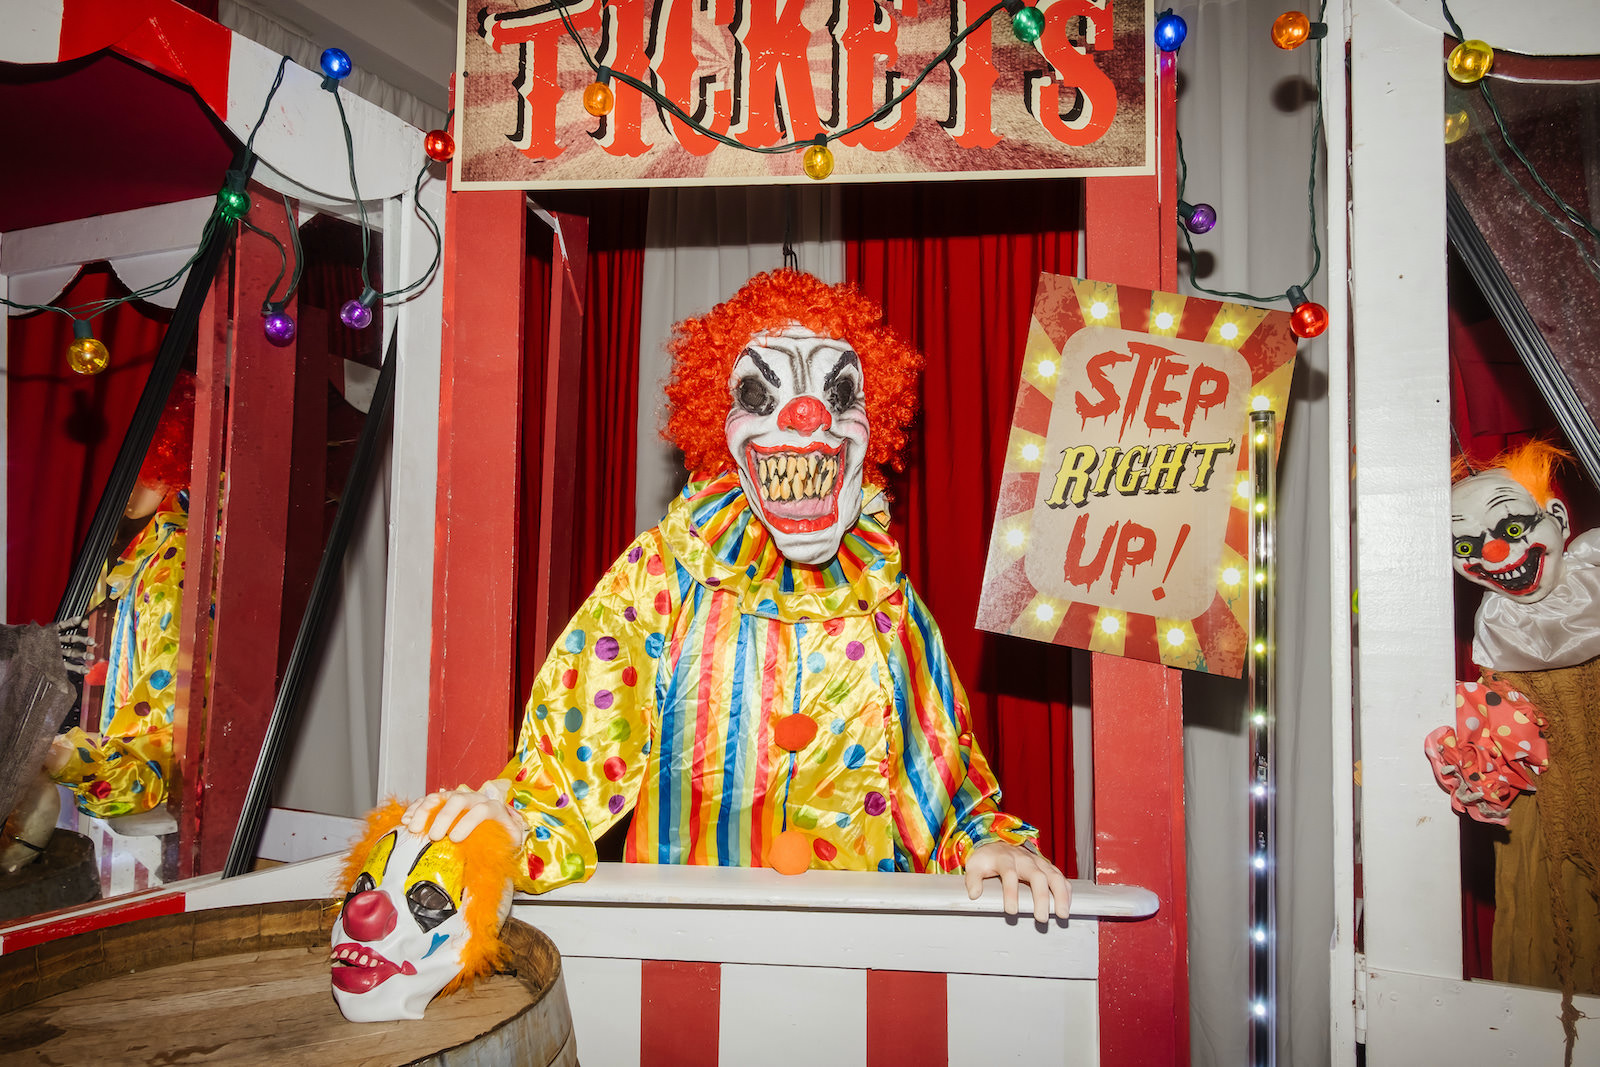 Creepy Halloween Wedding Decor, Carnival Ticket Booth with Scary Clown